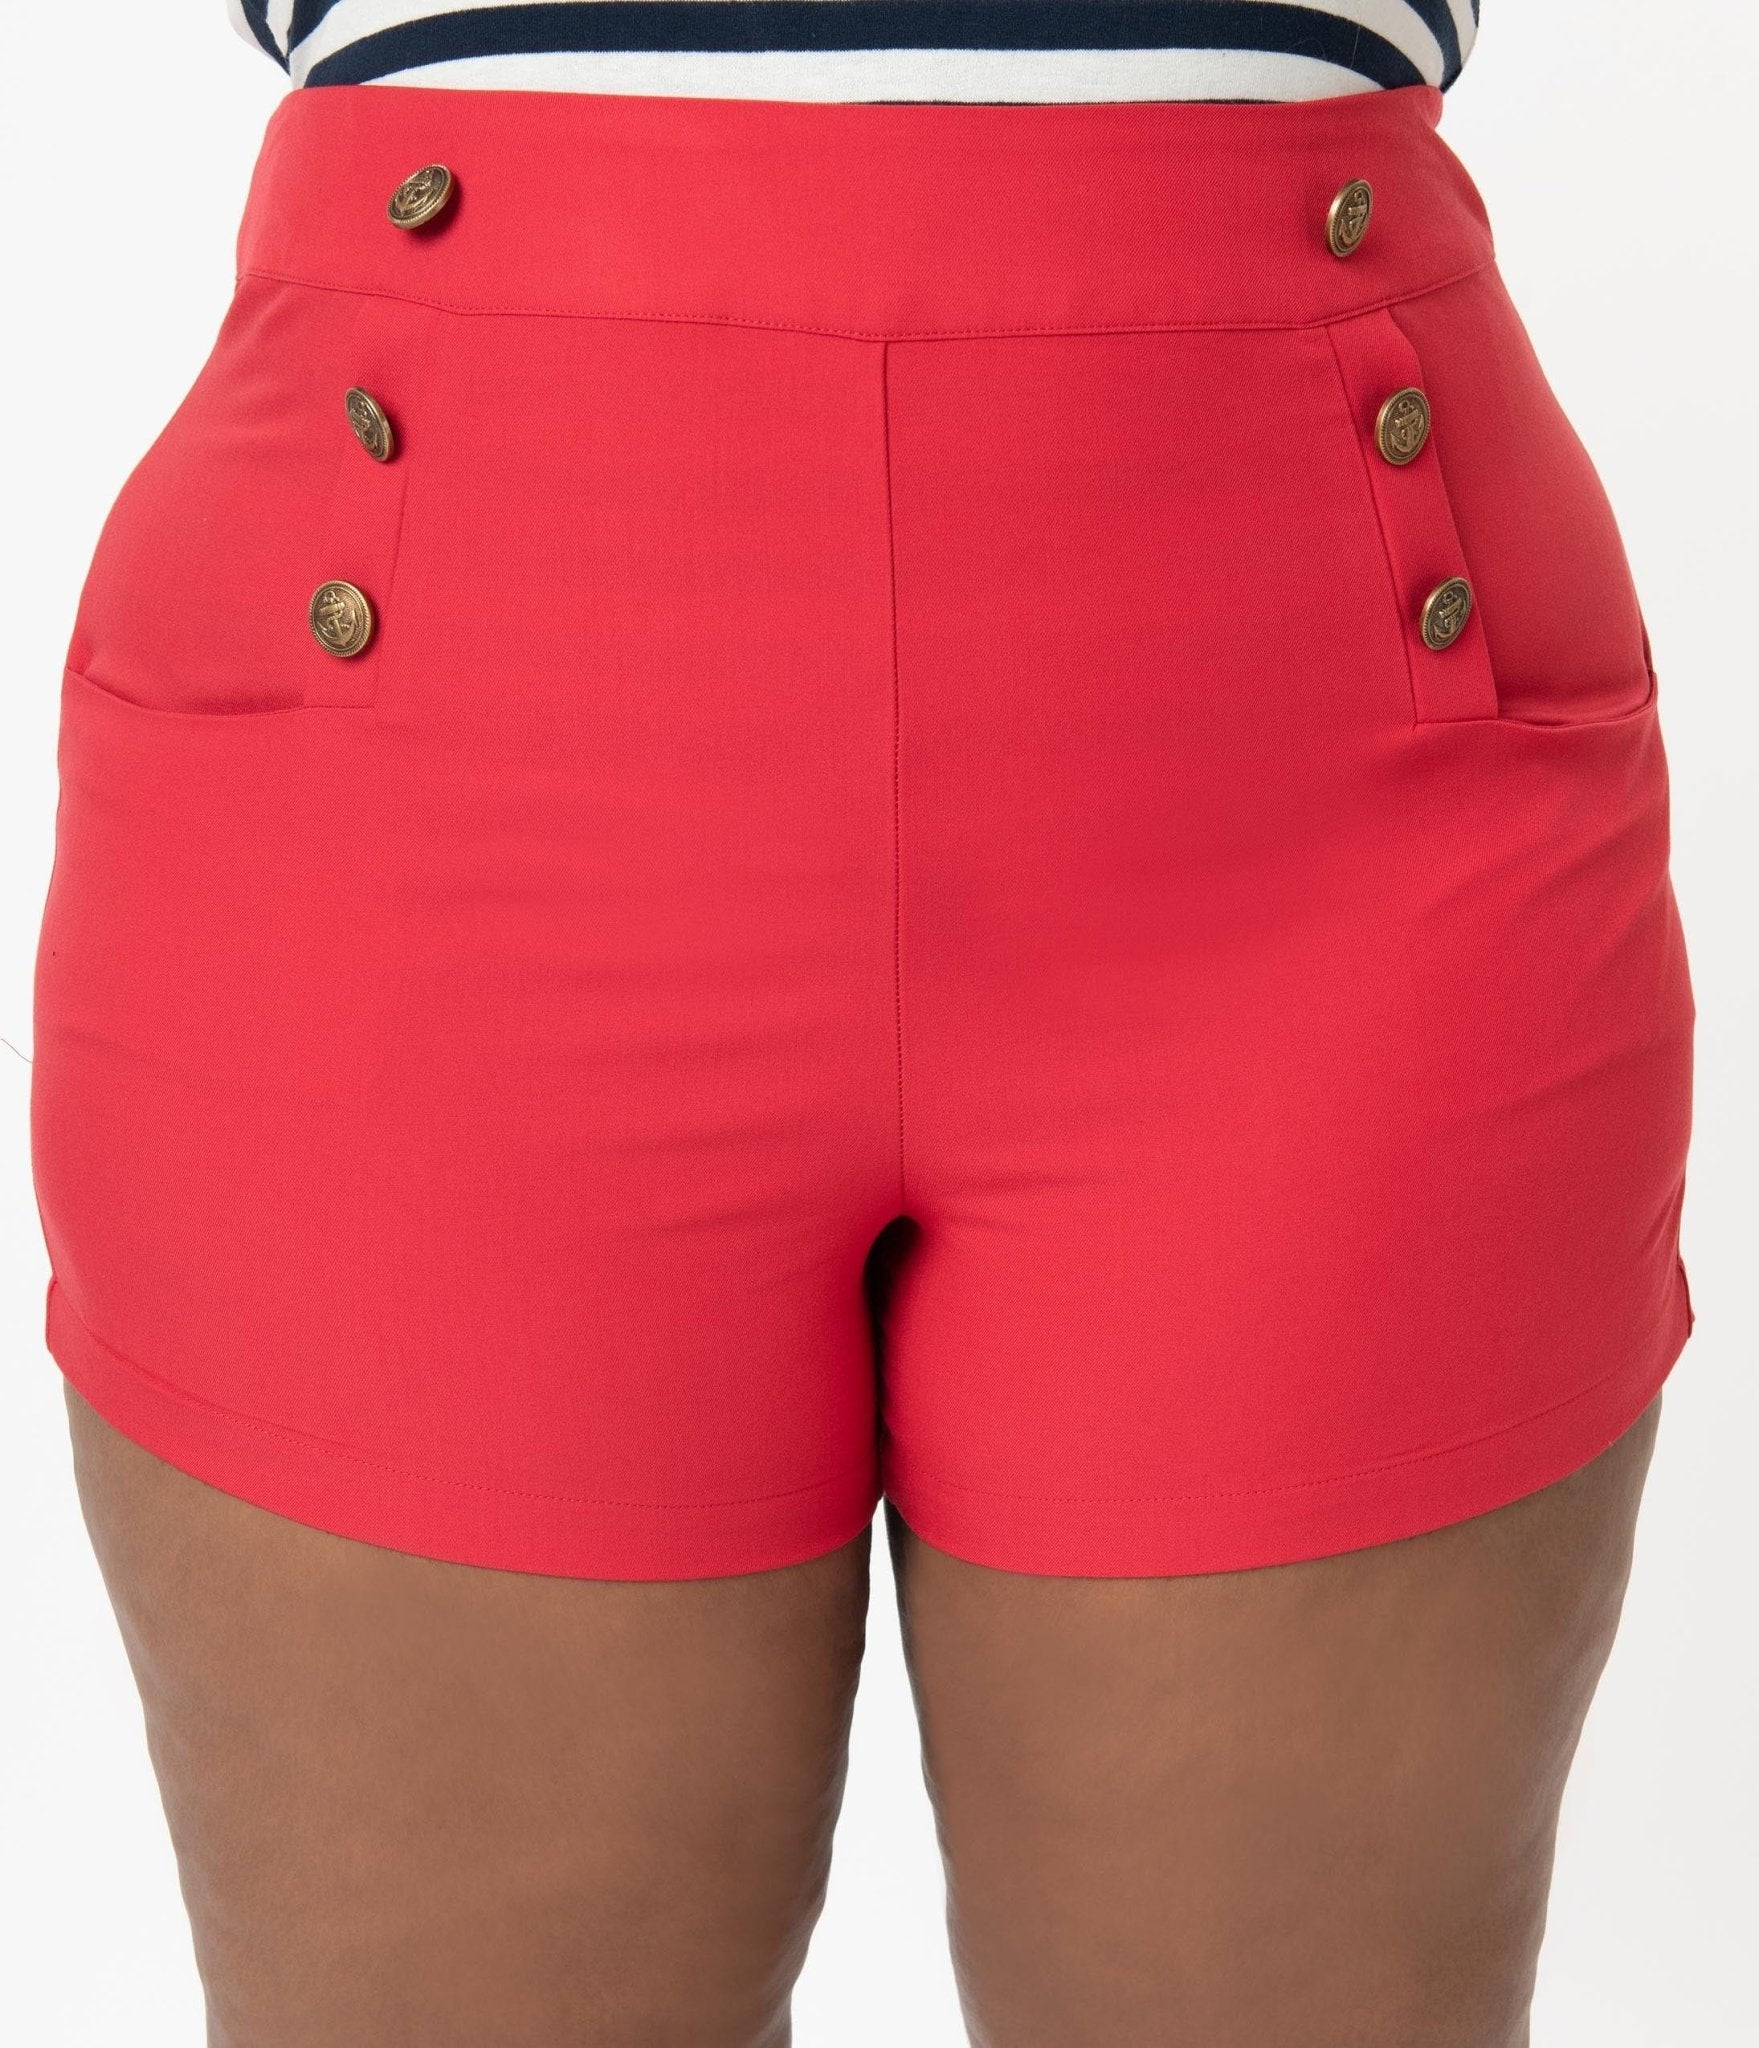 HIGH WAIST SHORTS Womens Red Flared Shorts With Pockets. 1940s